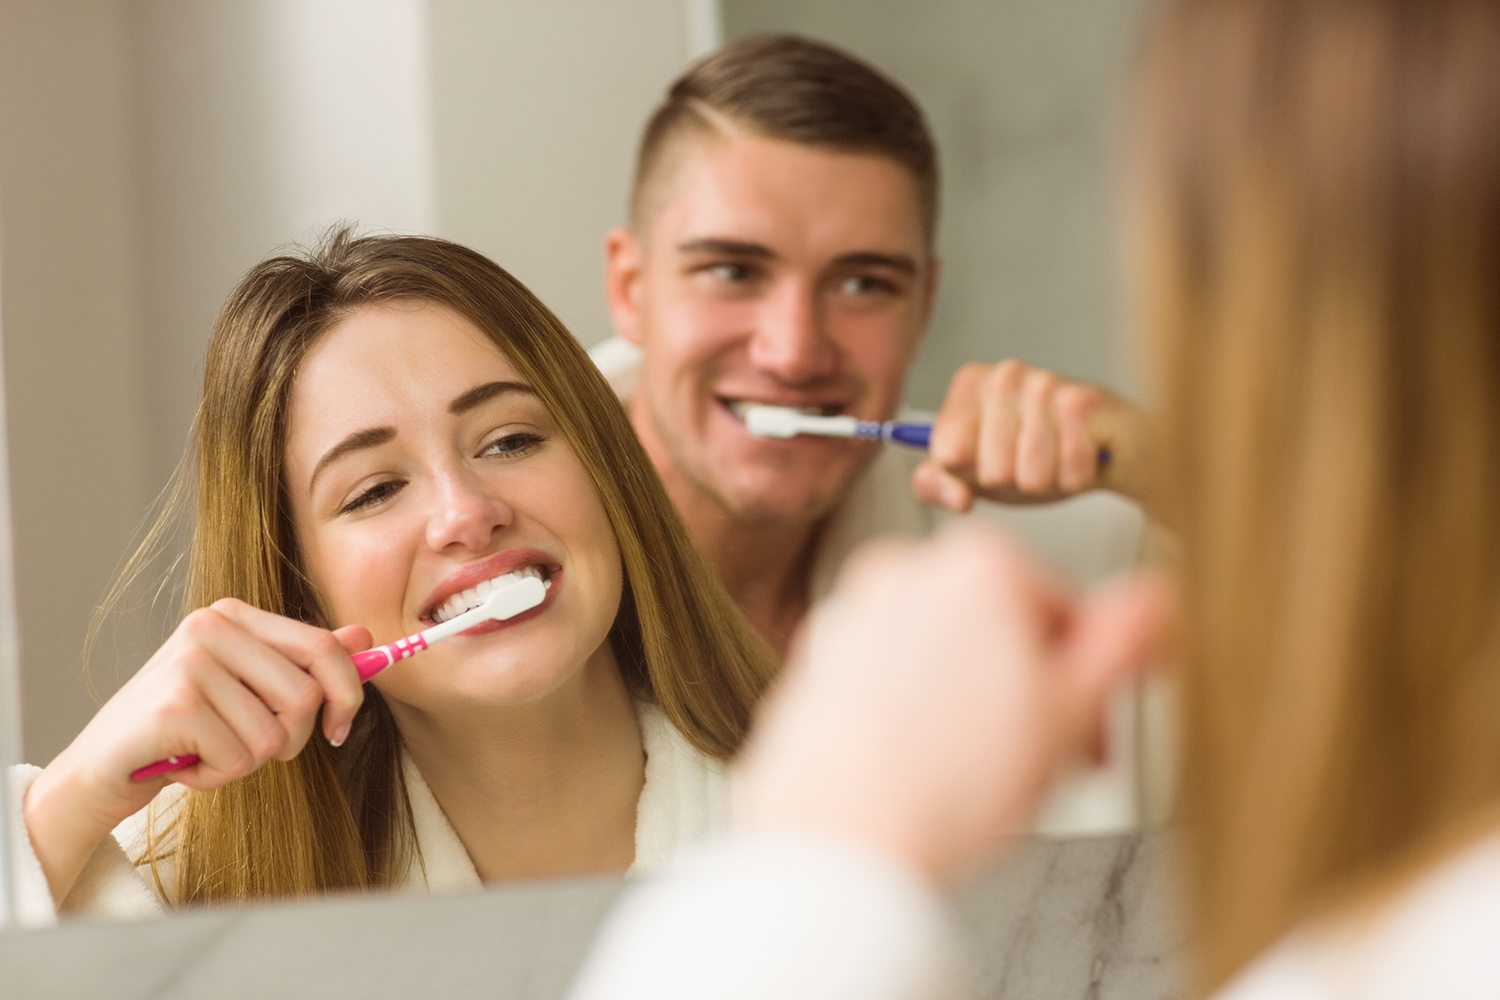 3 Best Ways to Keep Your Oral Health Under Control This Halloween